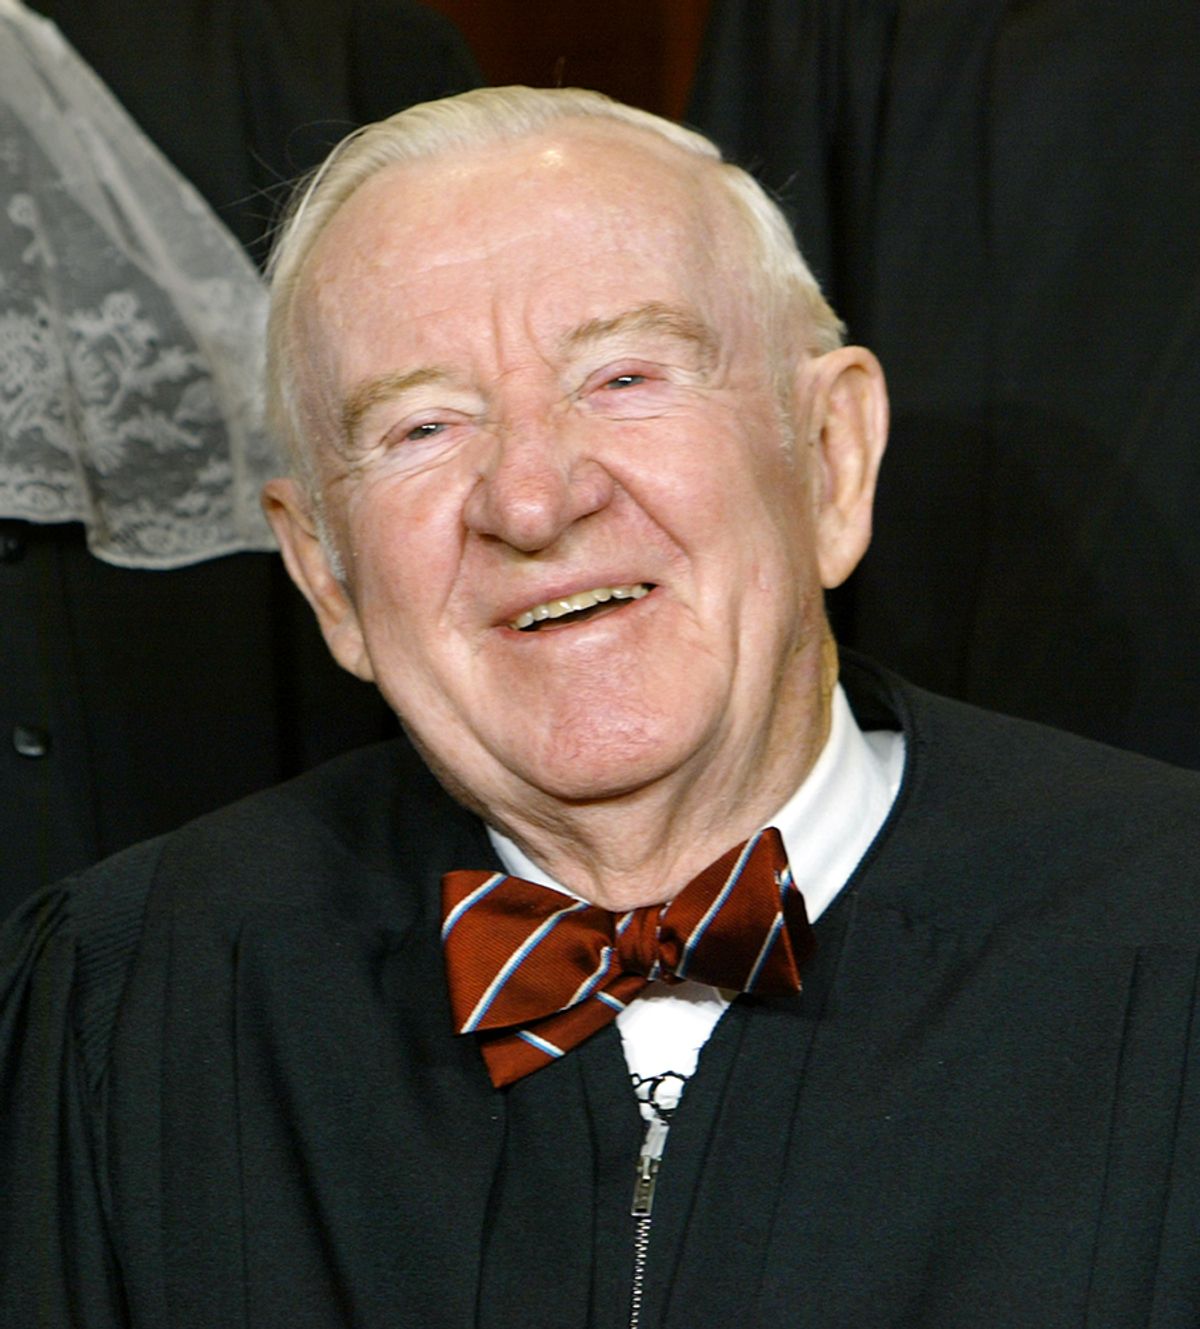 Supreme Court Associate Justice John Paul Stevens poses for photos during a group portrait session with the members of the U.S. Supreme Court, at the Supreme Court Building  in Washington, Friday, Dec. 05, 2003. President Ford nominated Stevens to the Supreme Court, taking his seat Dec. 19, 1975. (AP Photo/J. Scott Applewhite) (J. Scott Applewhite)